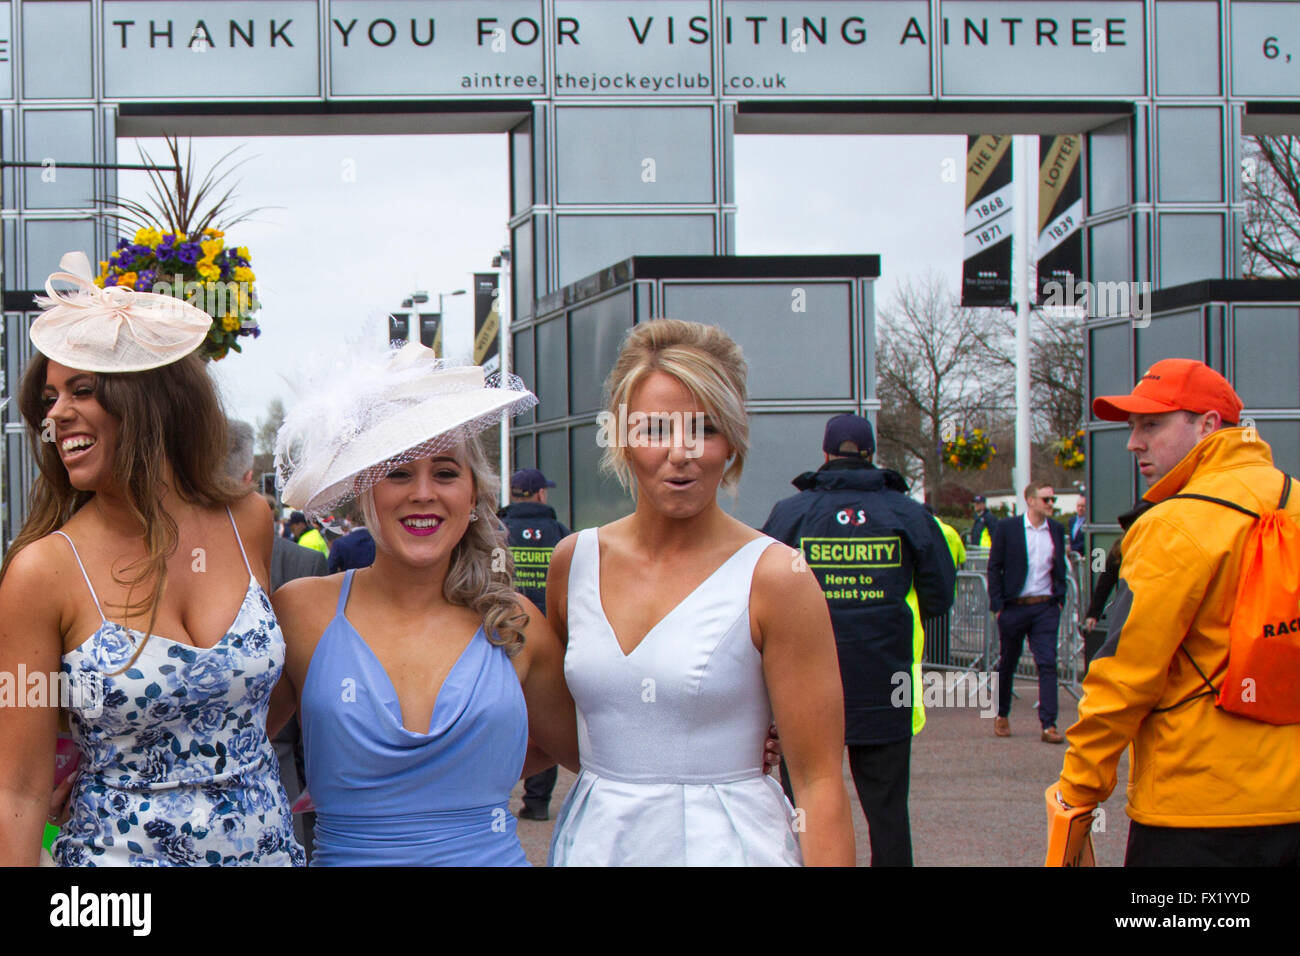 Ladies Day at the 2016 Aintree Grand National, Merseyside, UK.  In previous years attendee’s outfits have got attention for all wrong reasons, officials at the Grand National urged this year's racegoers to 'smarten up' to make the event more aspirational. Stock Photo